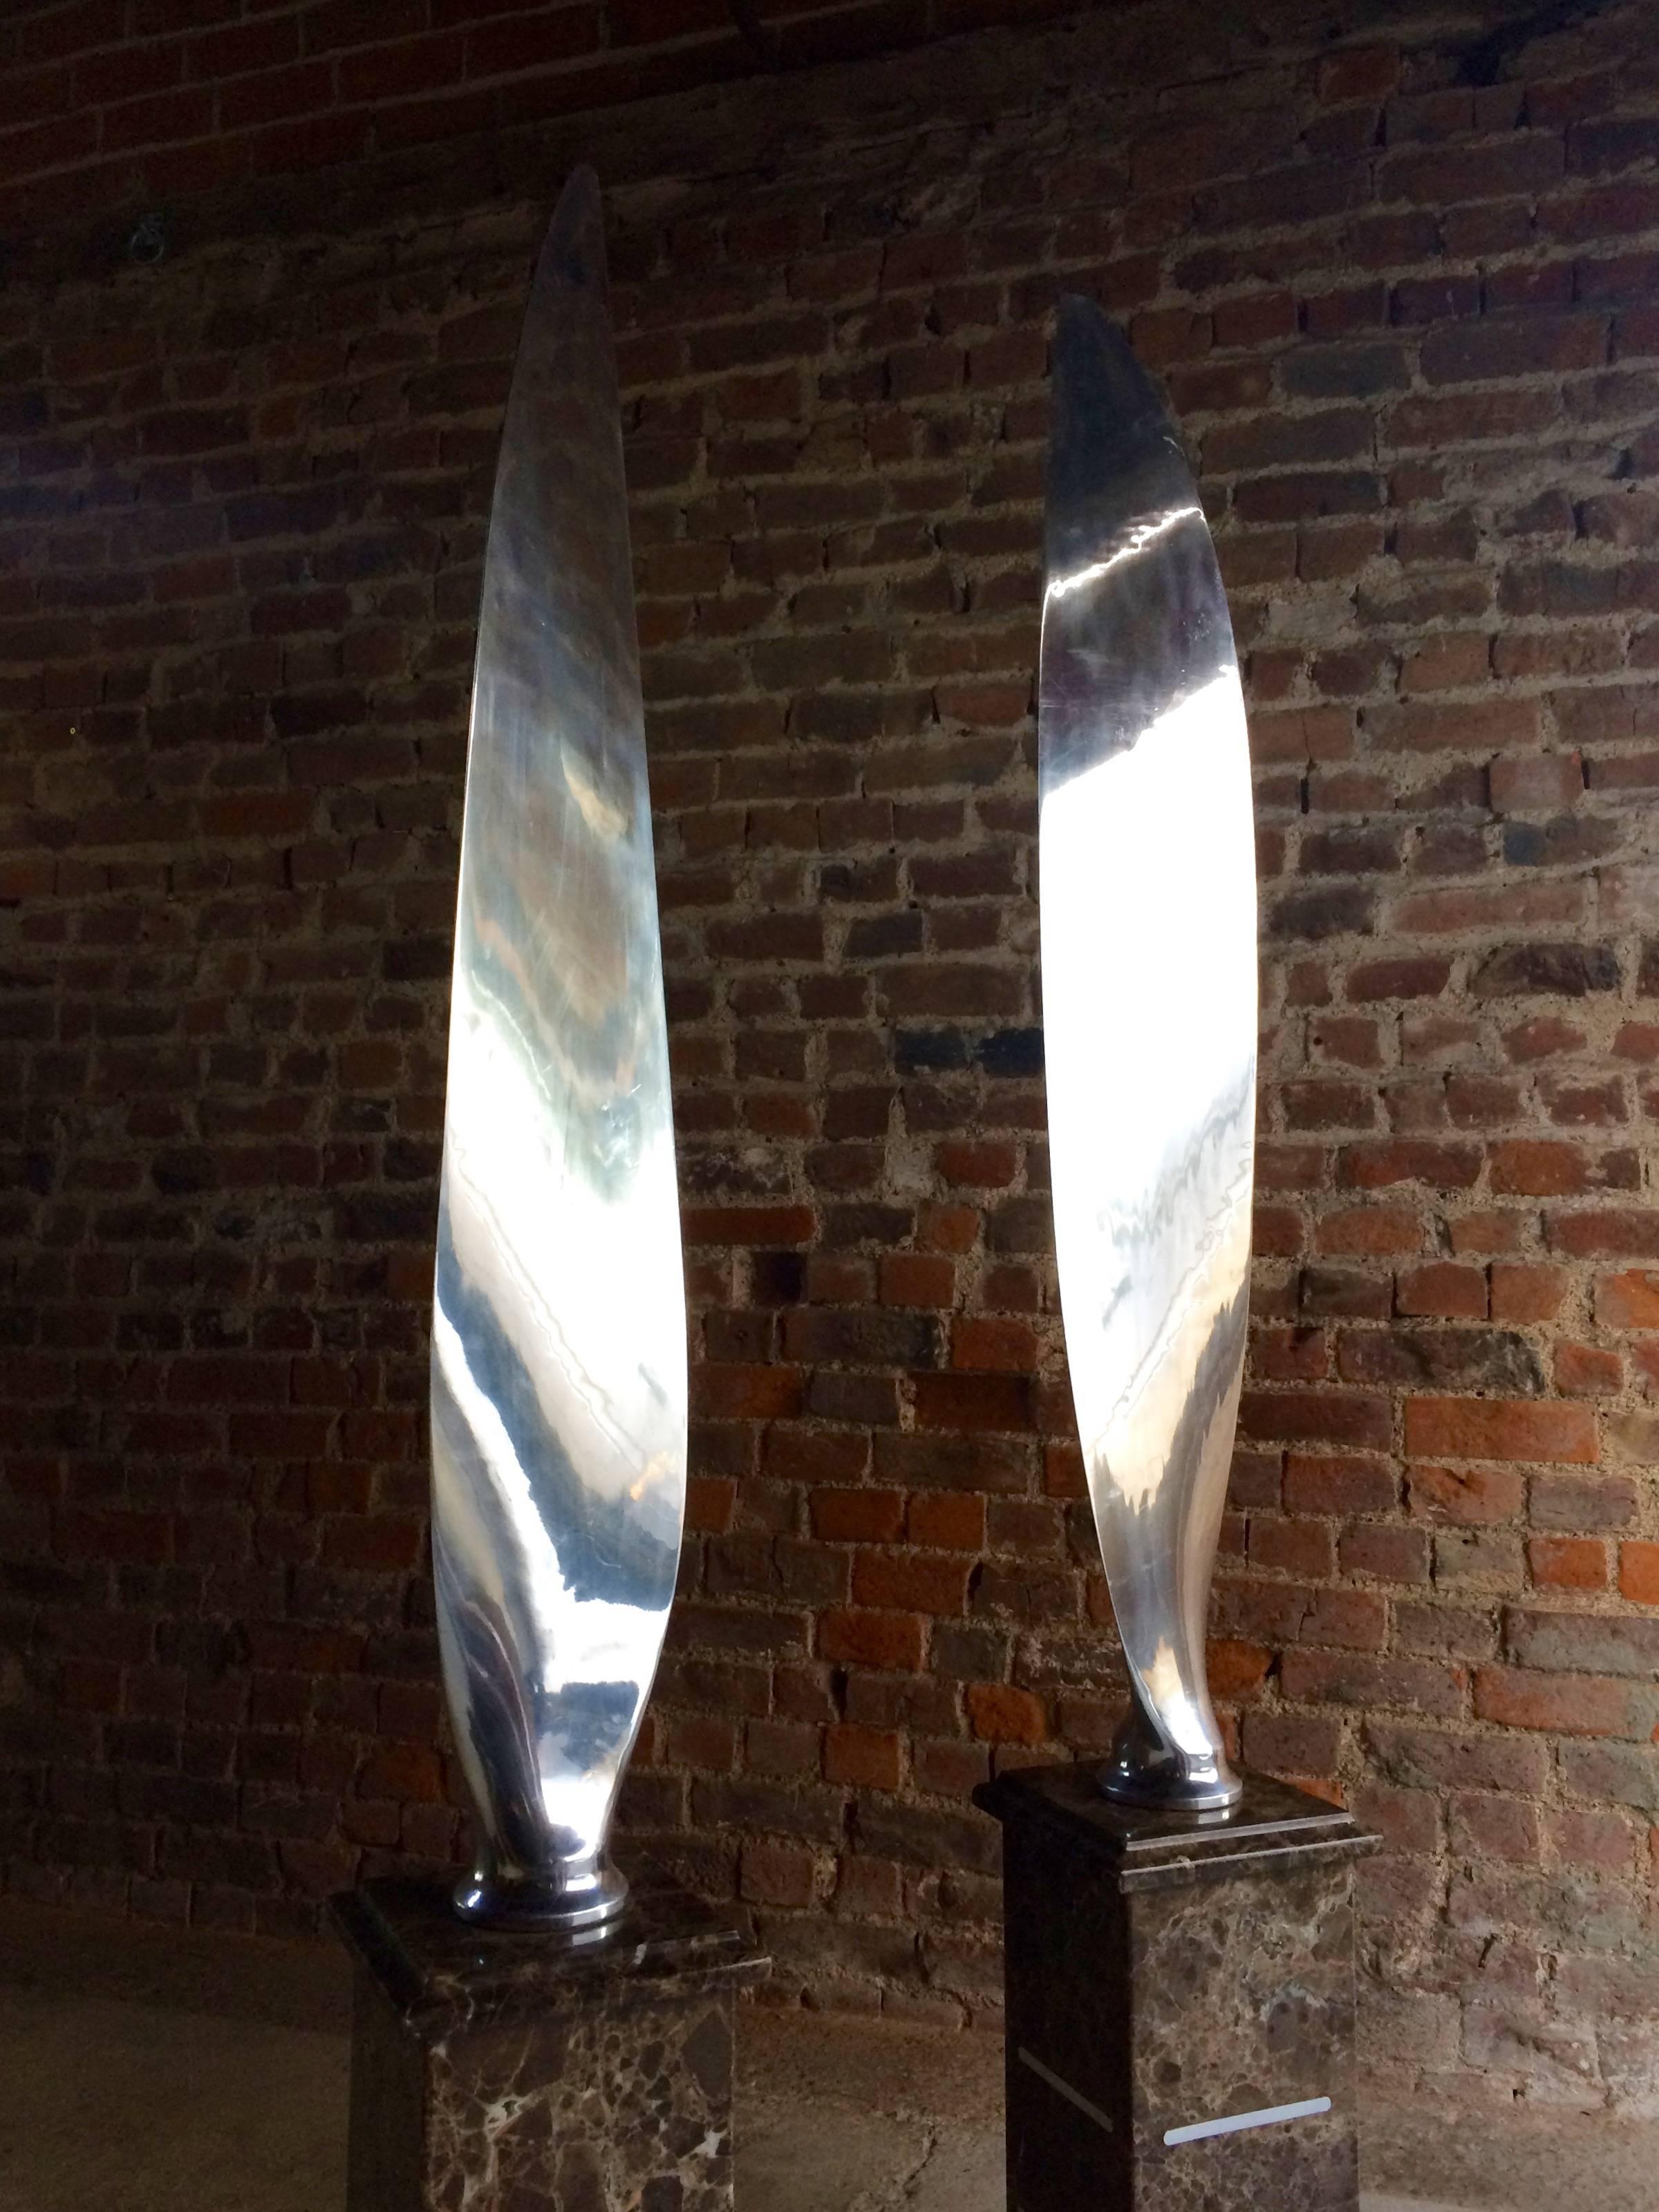 Pair of Tall Polished Chrome Airplane Propeller Blades Sculptures In Good Condition In Longdon, Tewkesbury